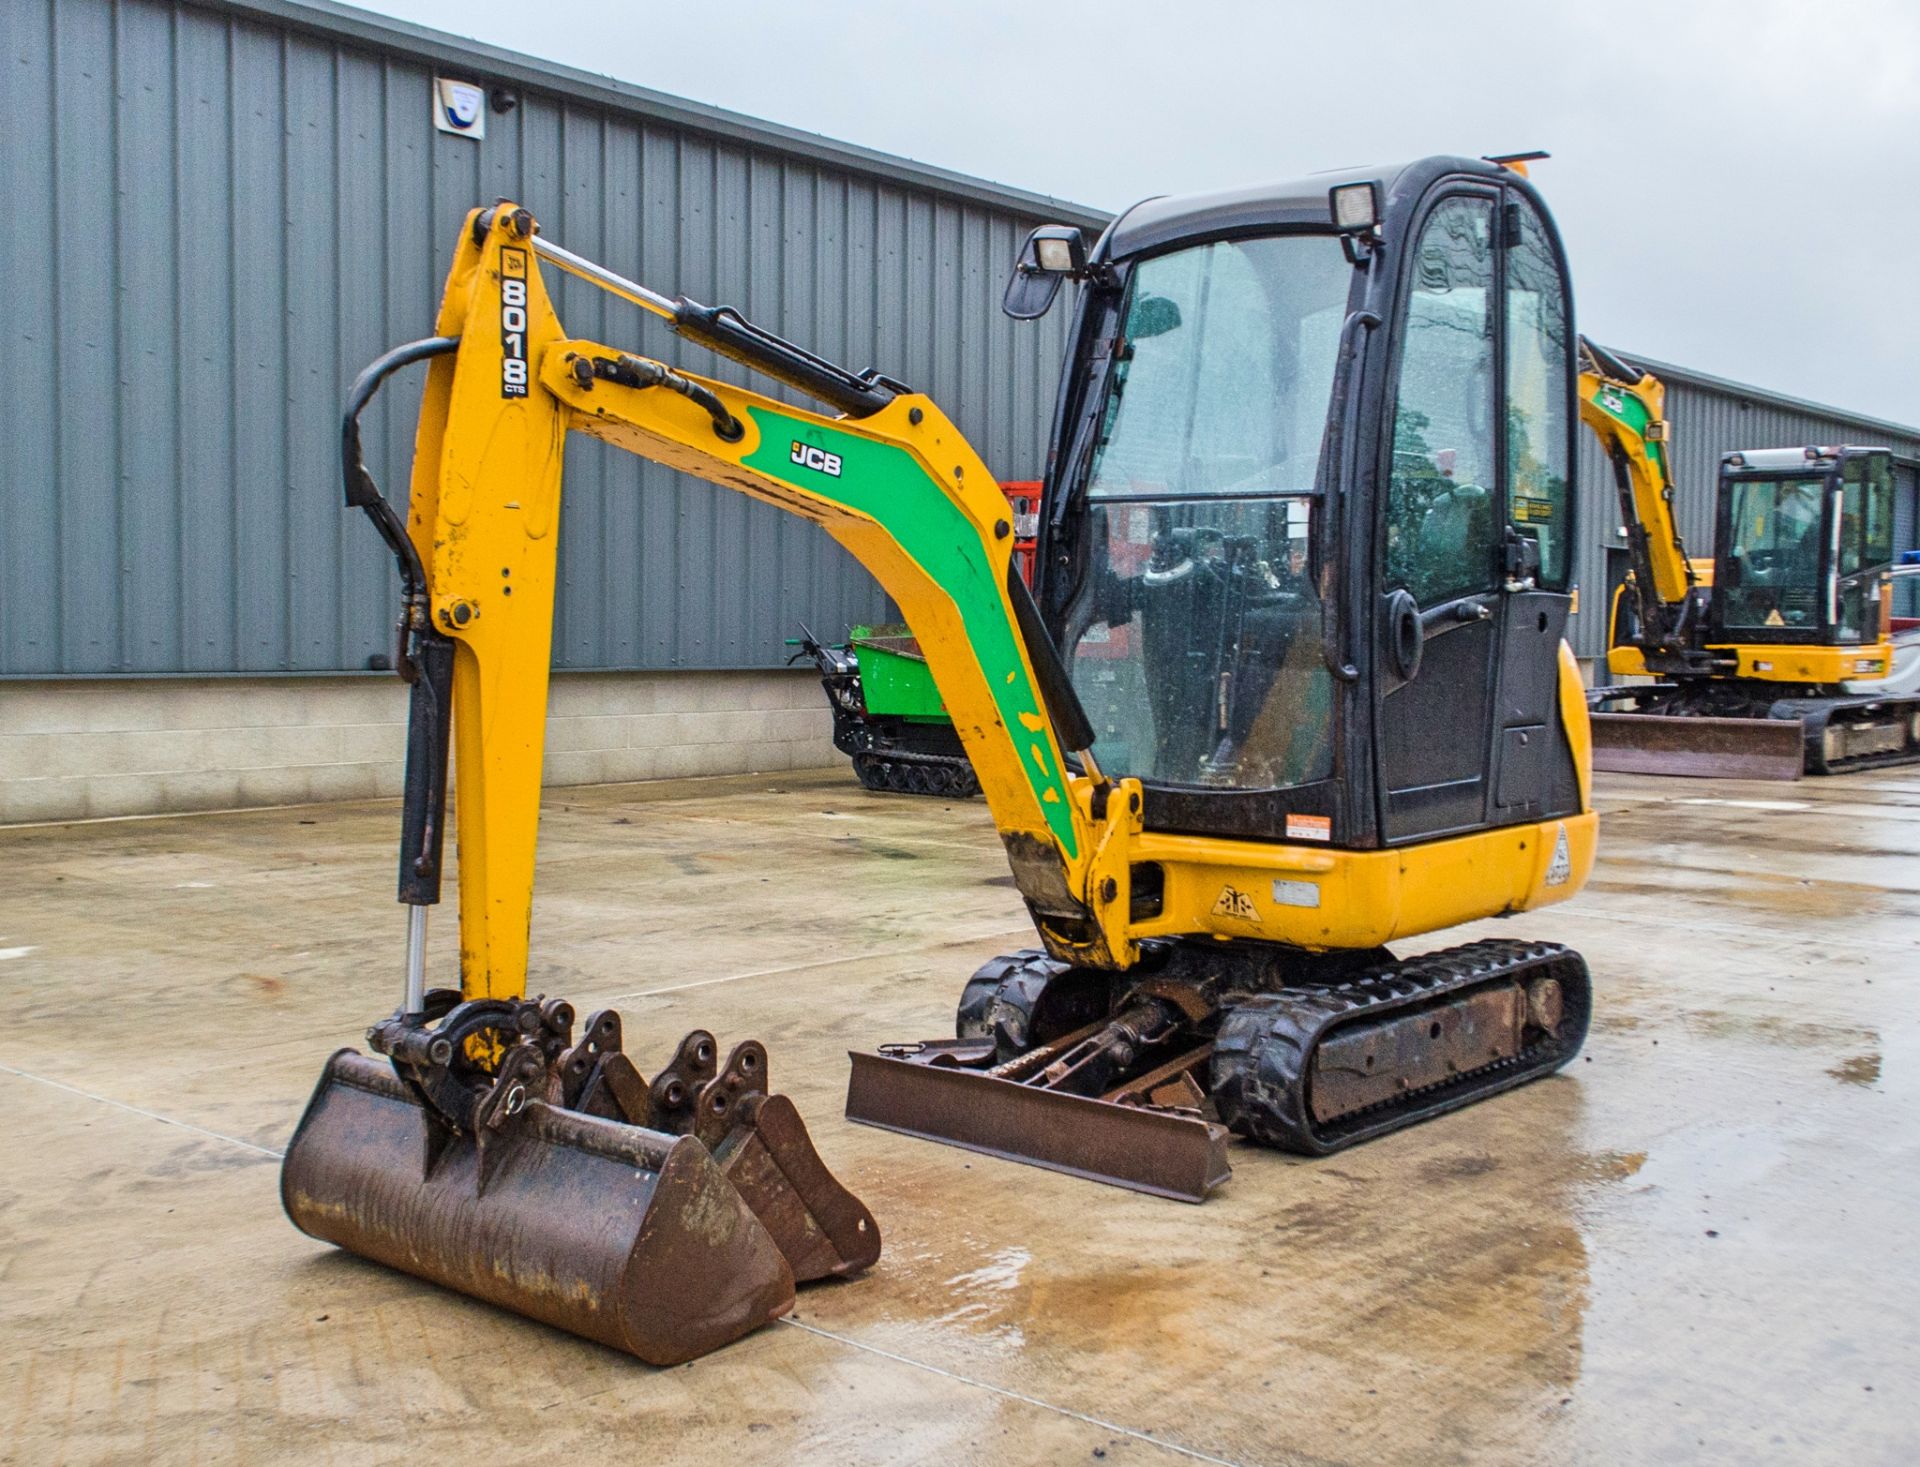 JCB 8018 CTS 1.5 tonne rubber tracked mini excavator Year: 2016 S/N: 2497627 Recorded Hours: 2351